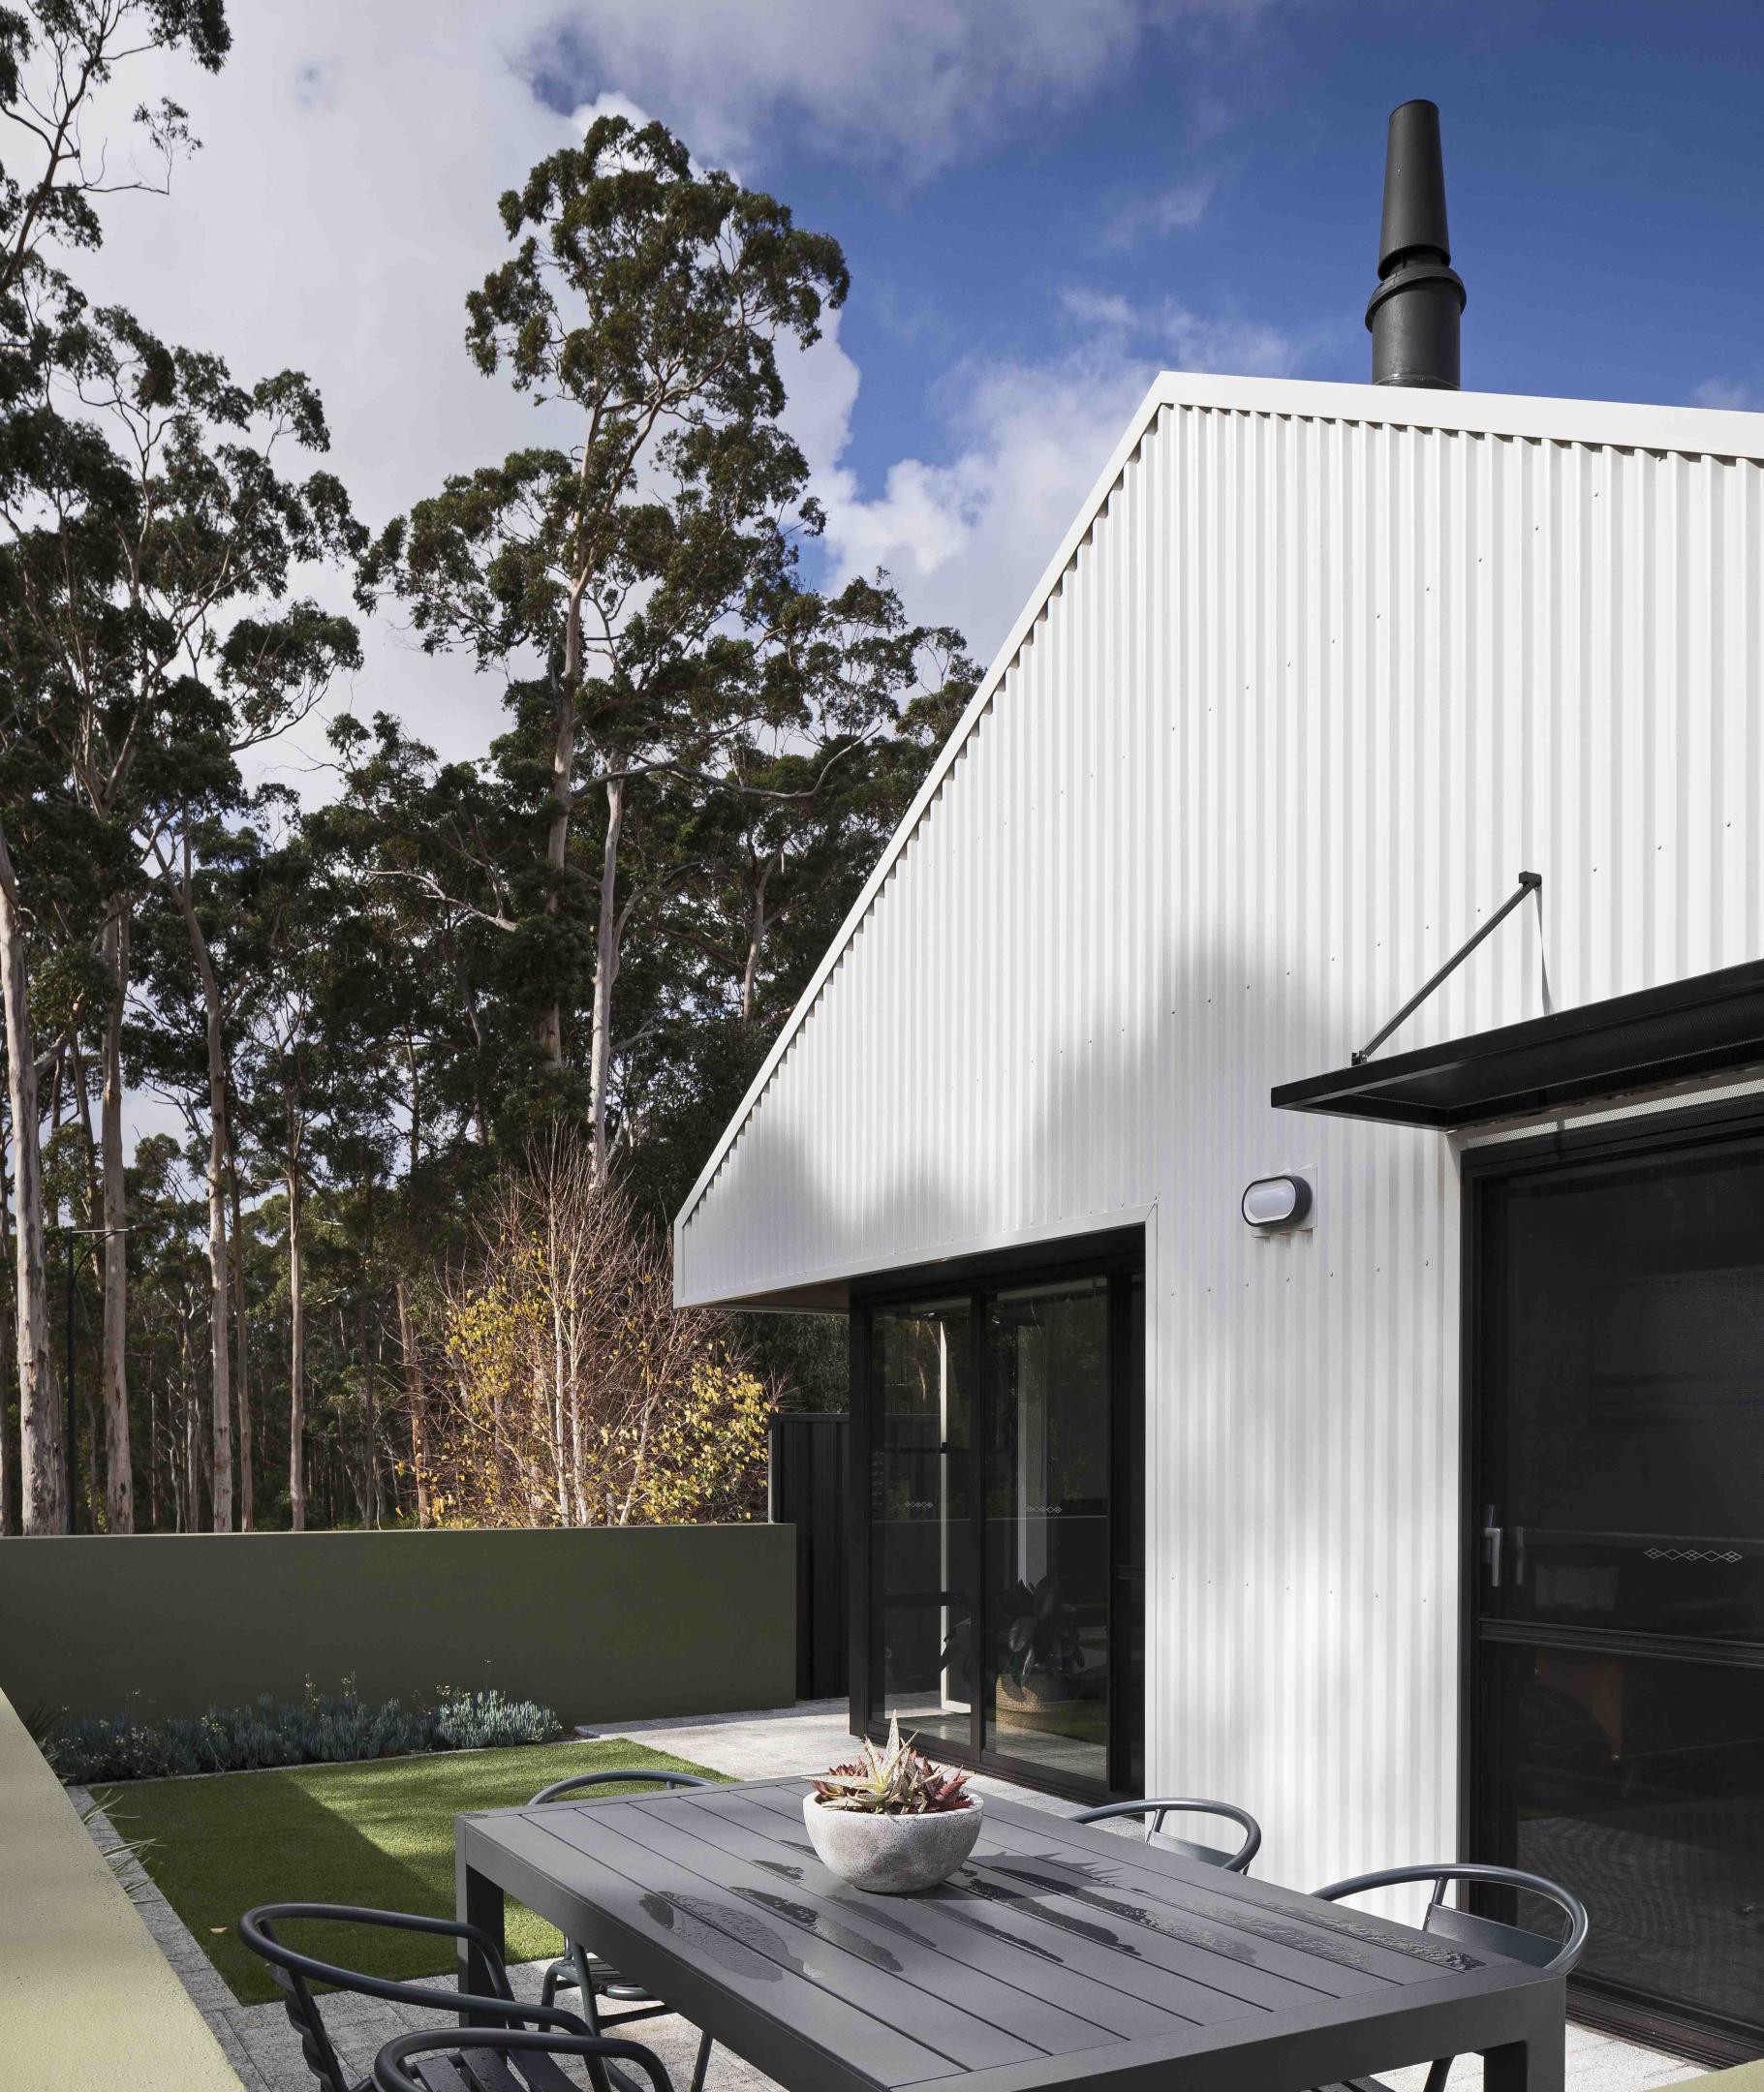 COLORBOND® steel Surfmist® cladding and roofing